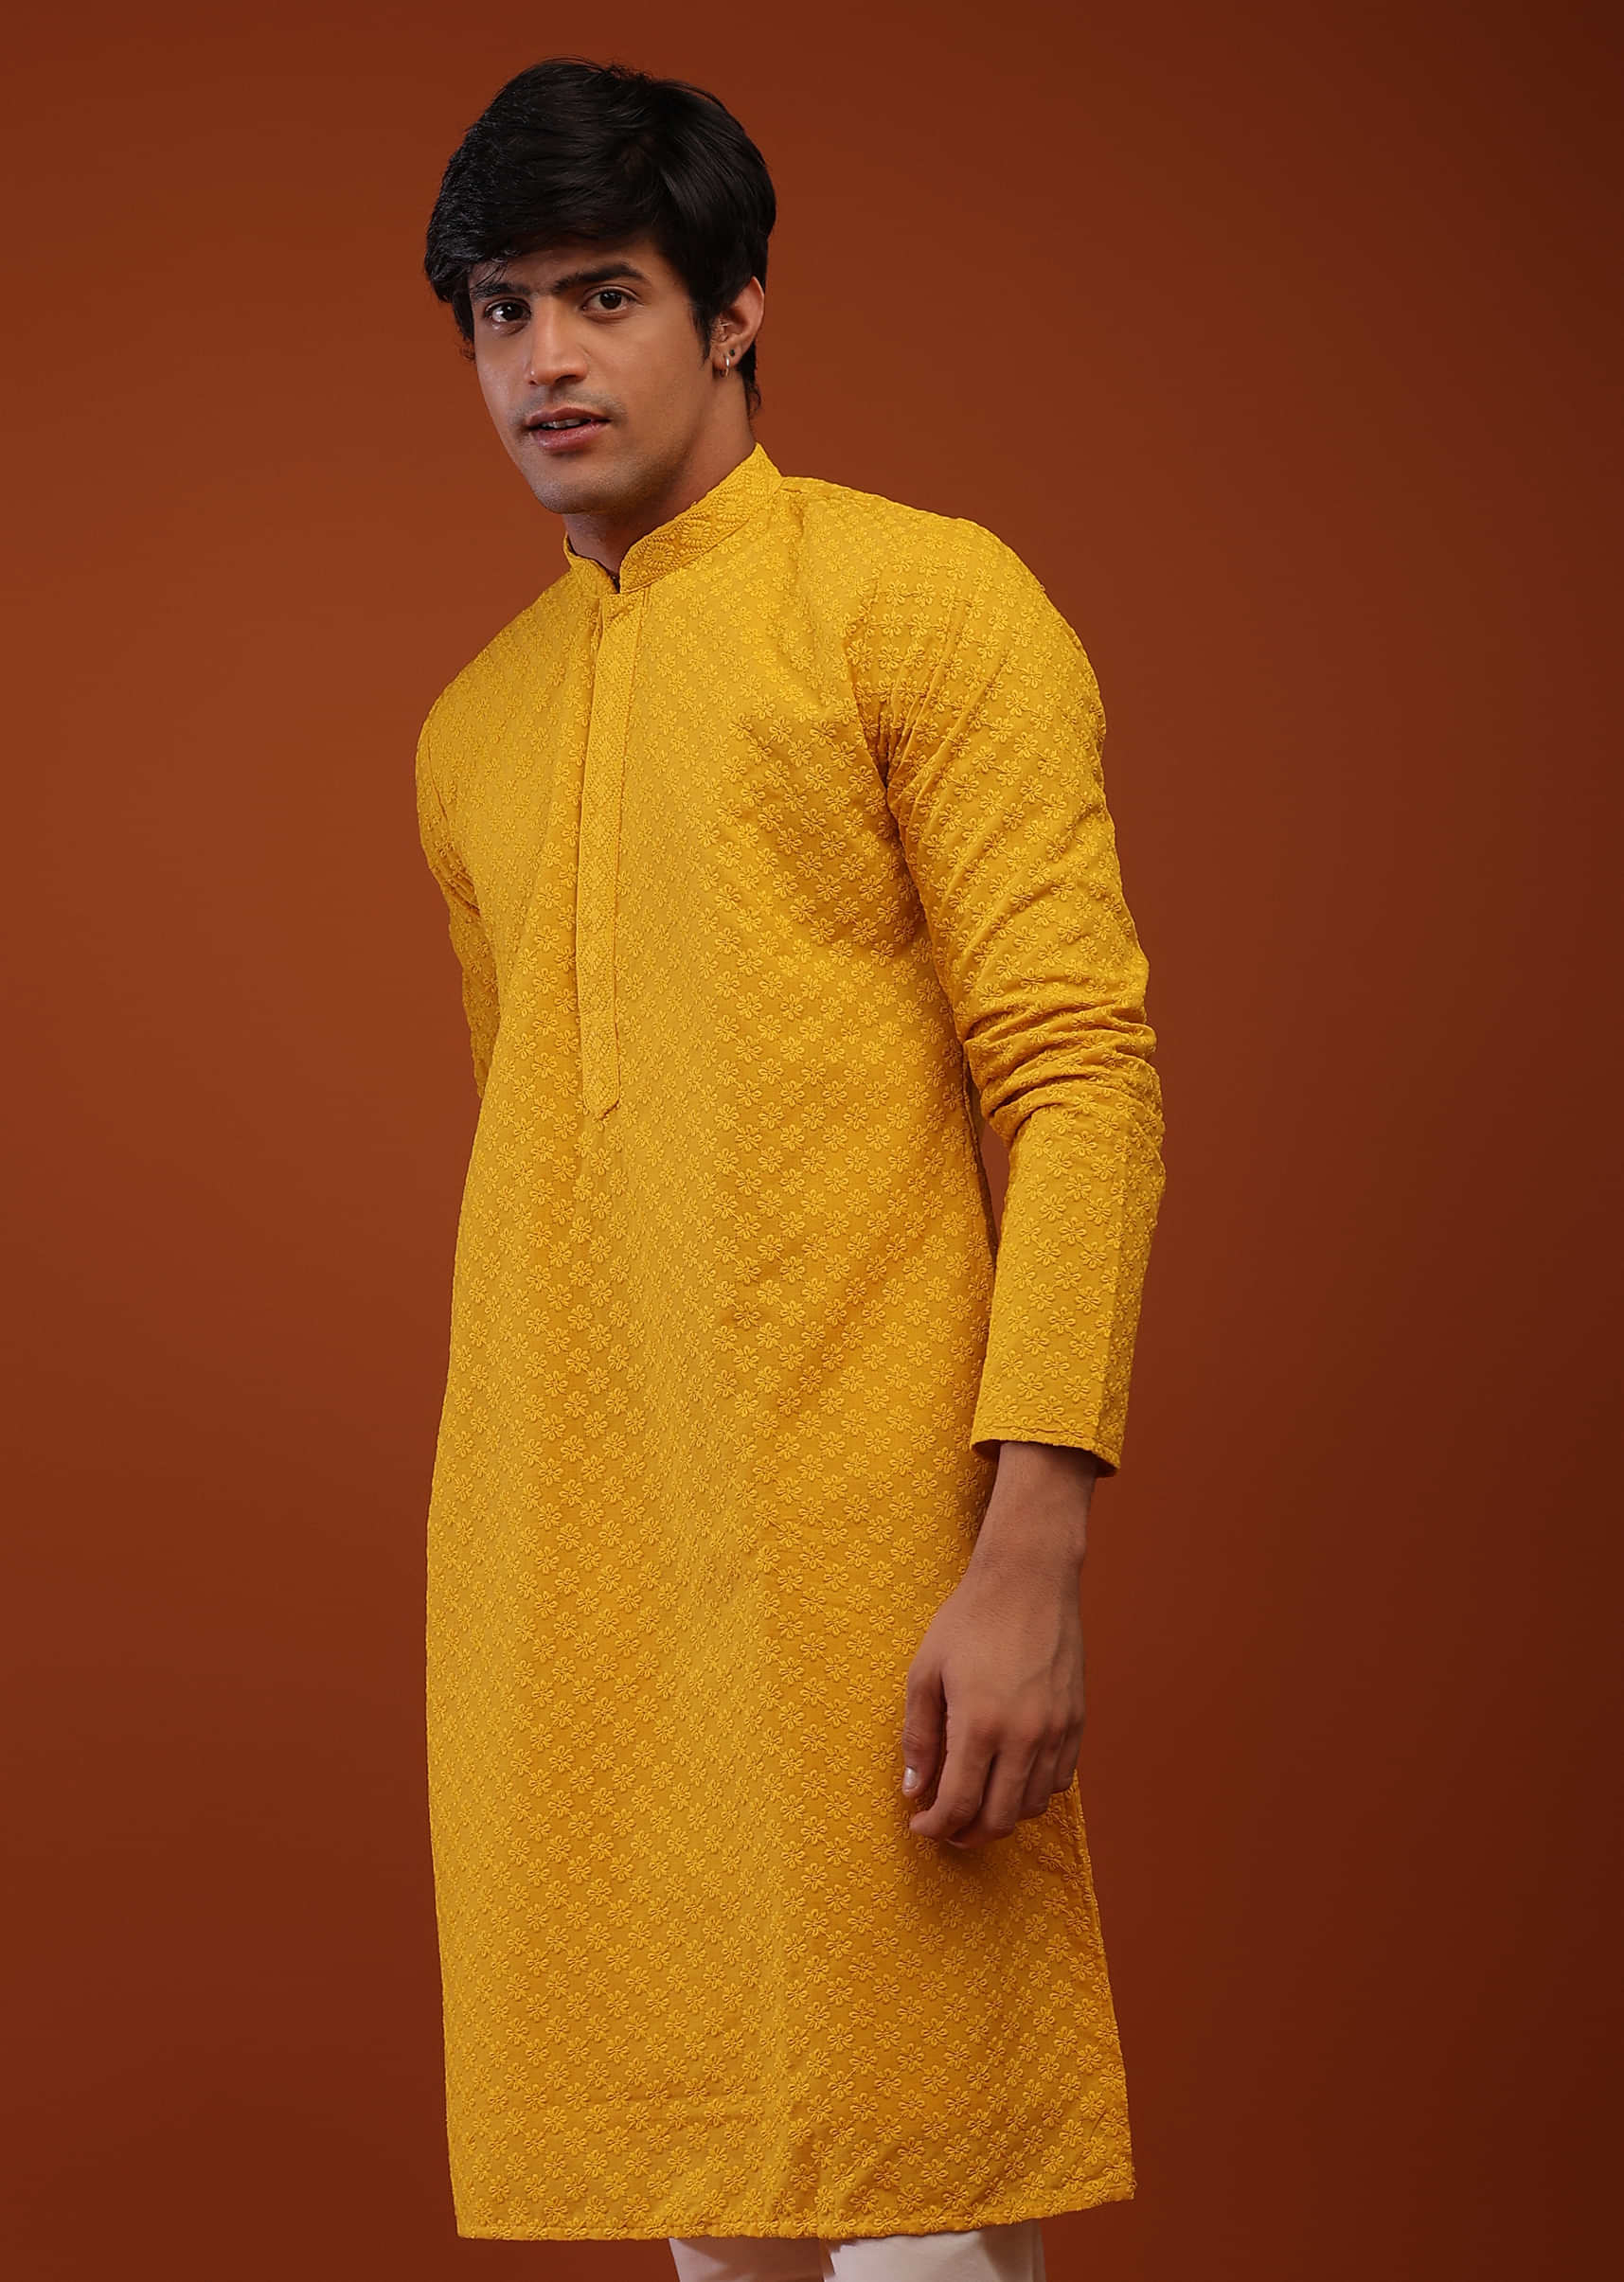 Chrome Yellow Raw Silk Kurta Set With Lucknowi Embroidery, Hook Closure And A Placket On The Yoke